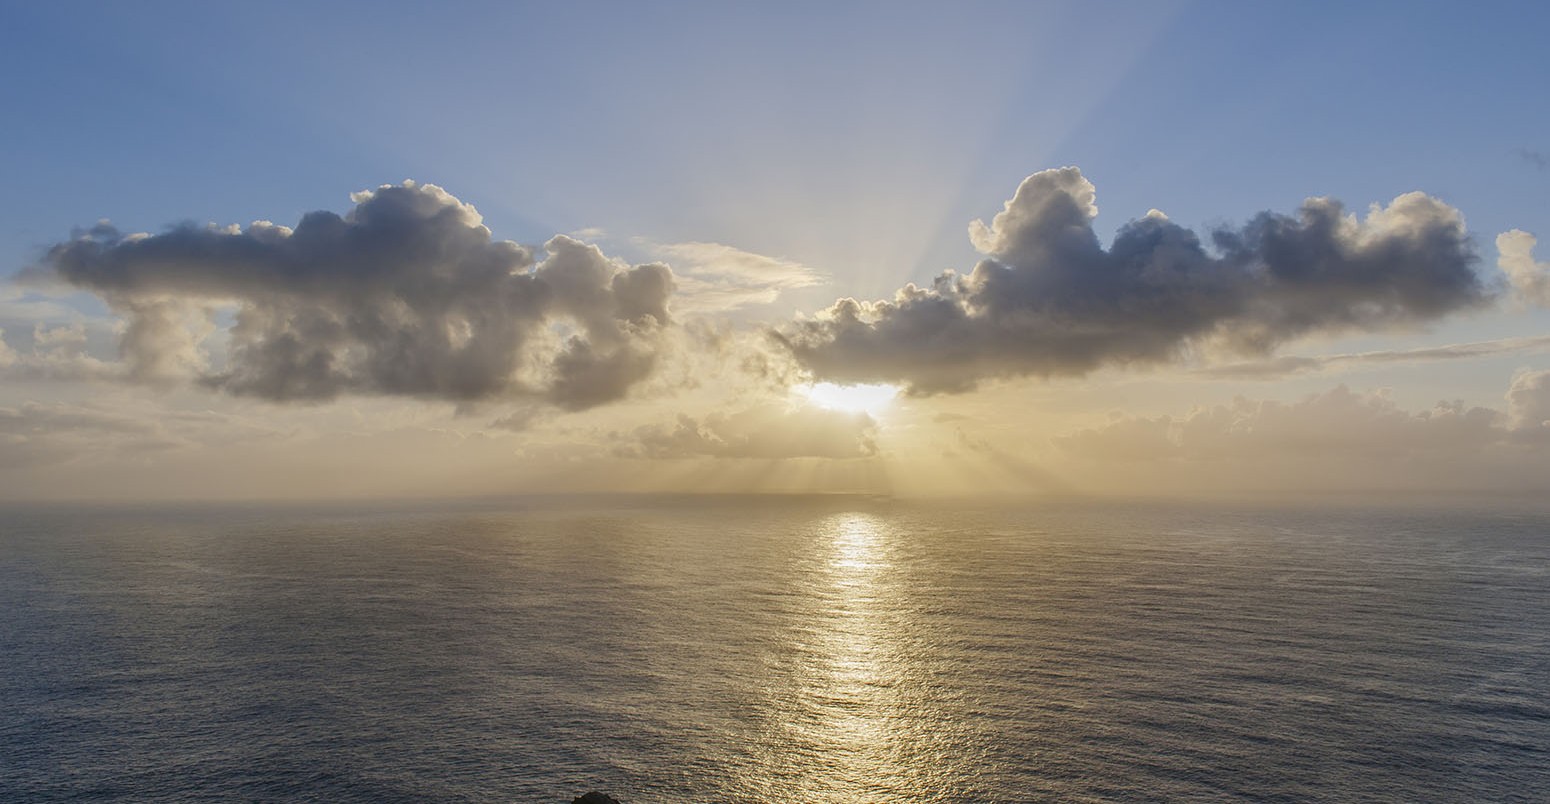 Evening sun behind clouds above the sea, Shetland Islands.